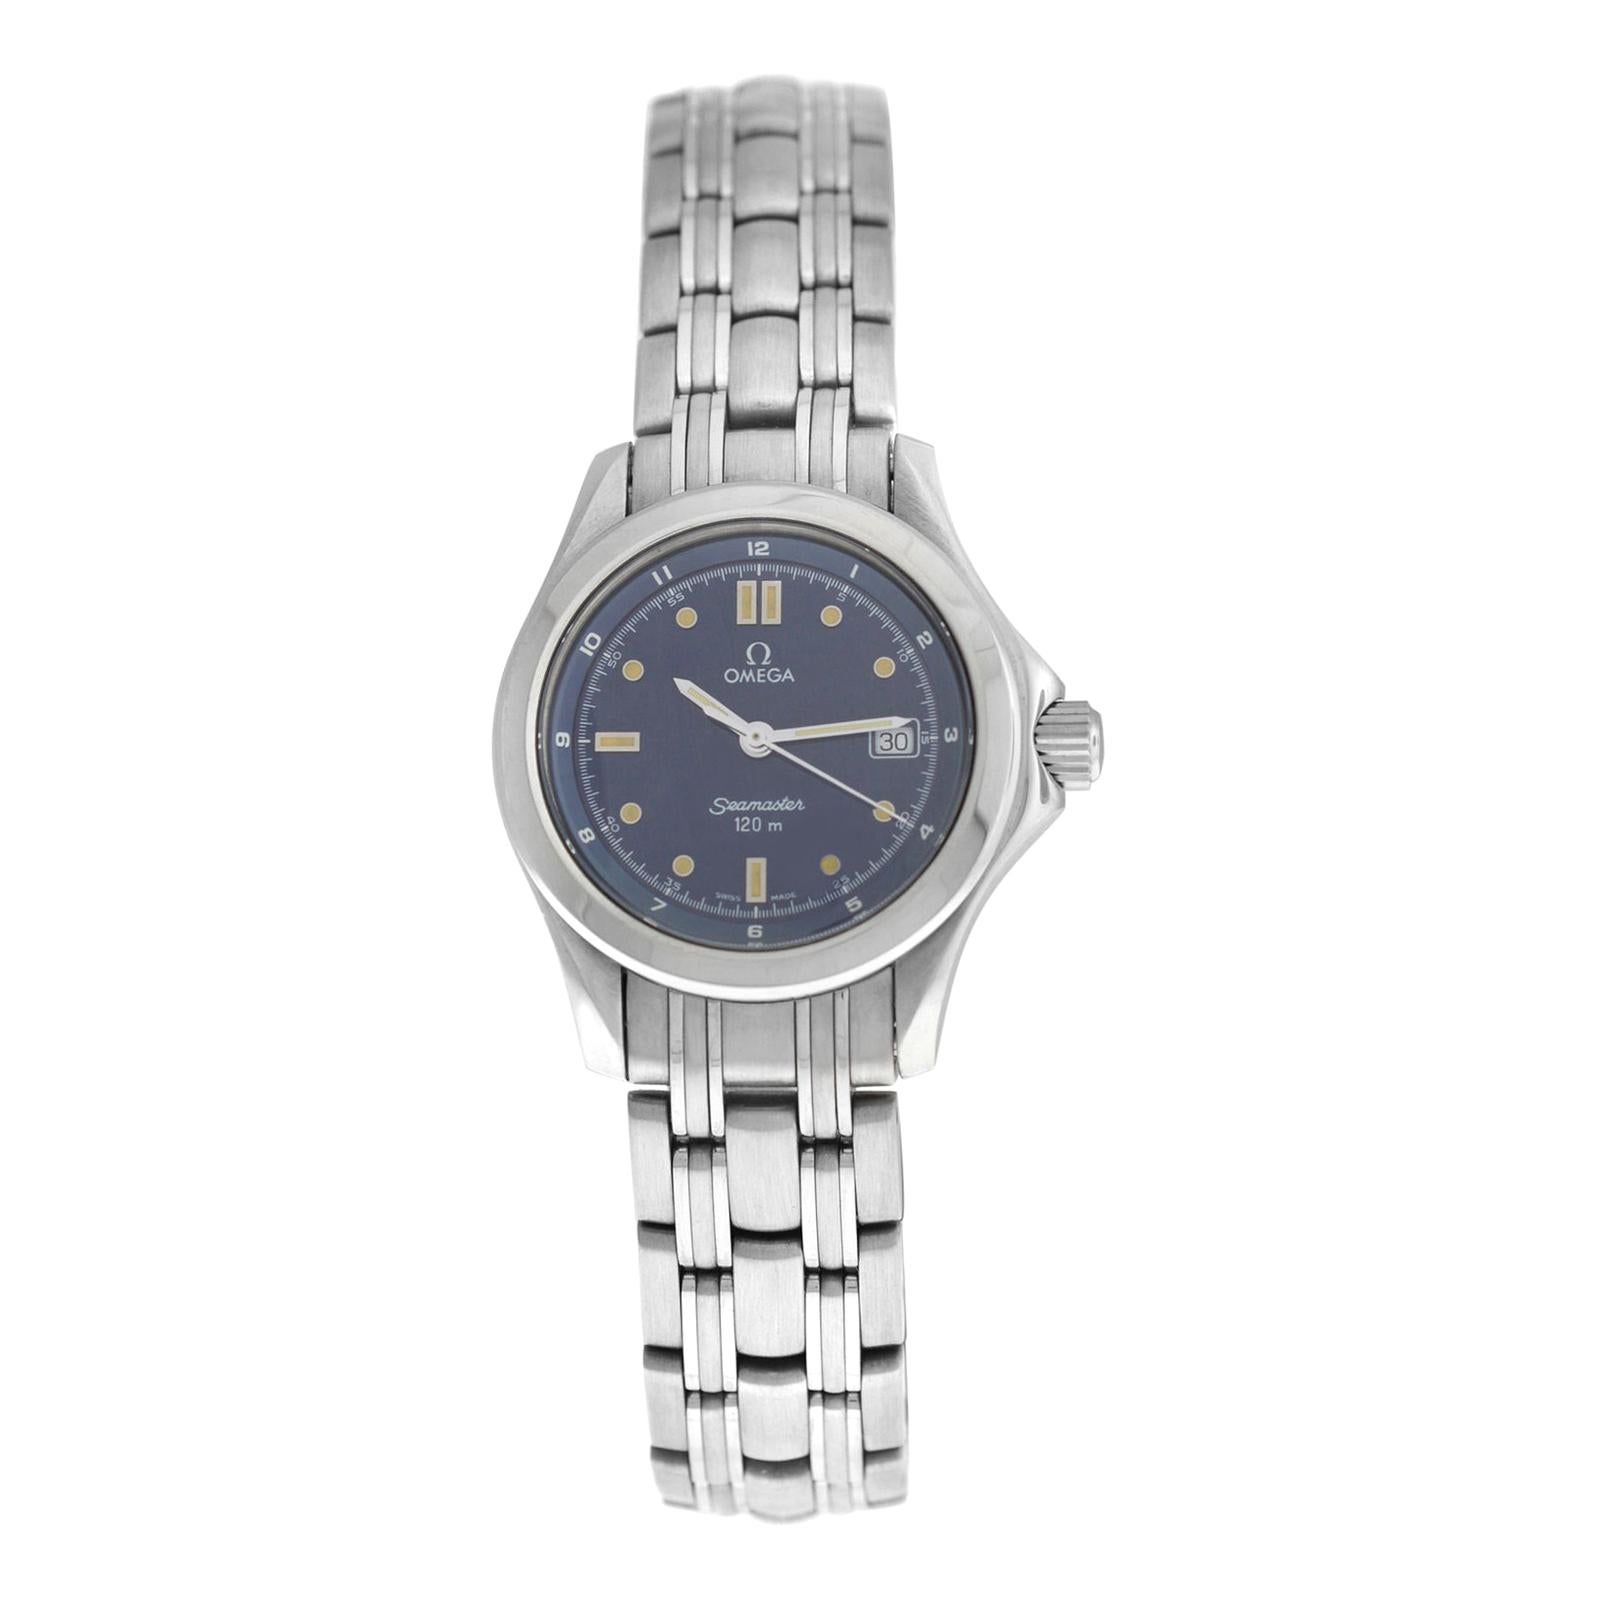 Ladies Omega Seamaster 5961501 Stainless Steel Date Quartz Watch For Sale